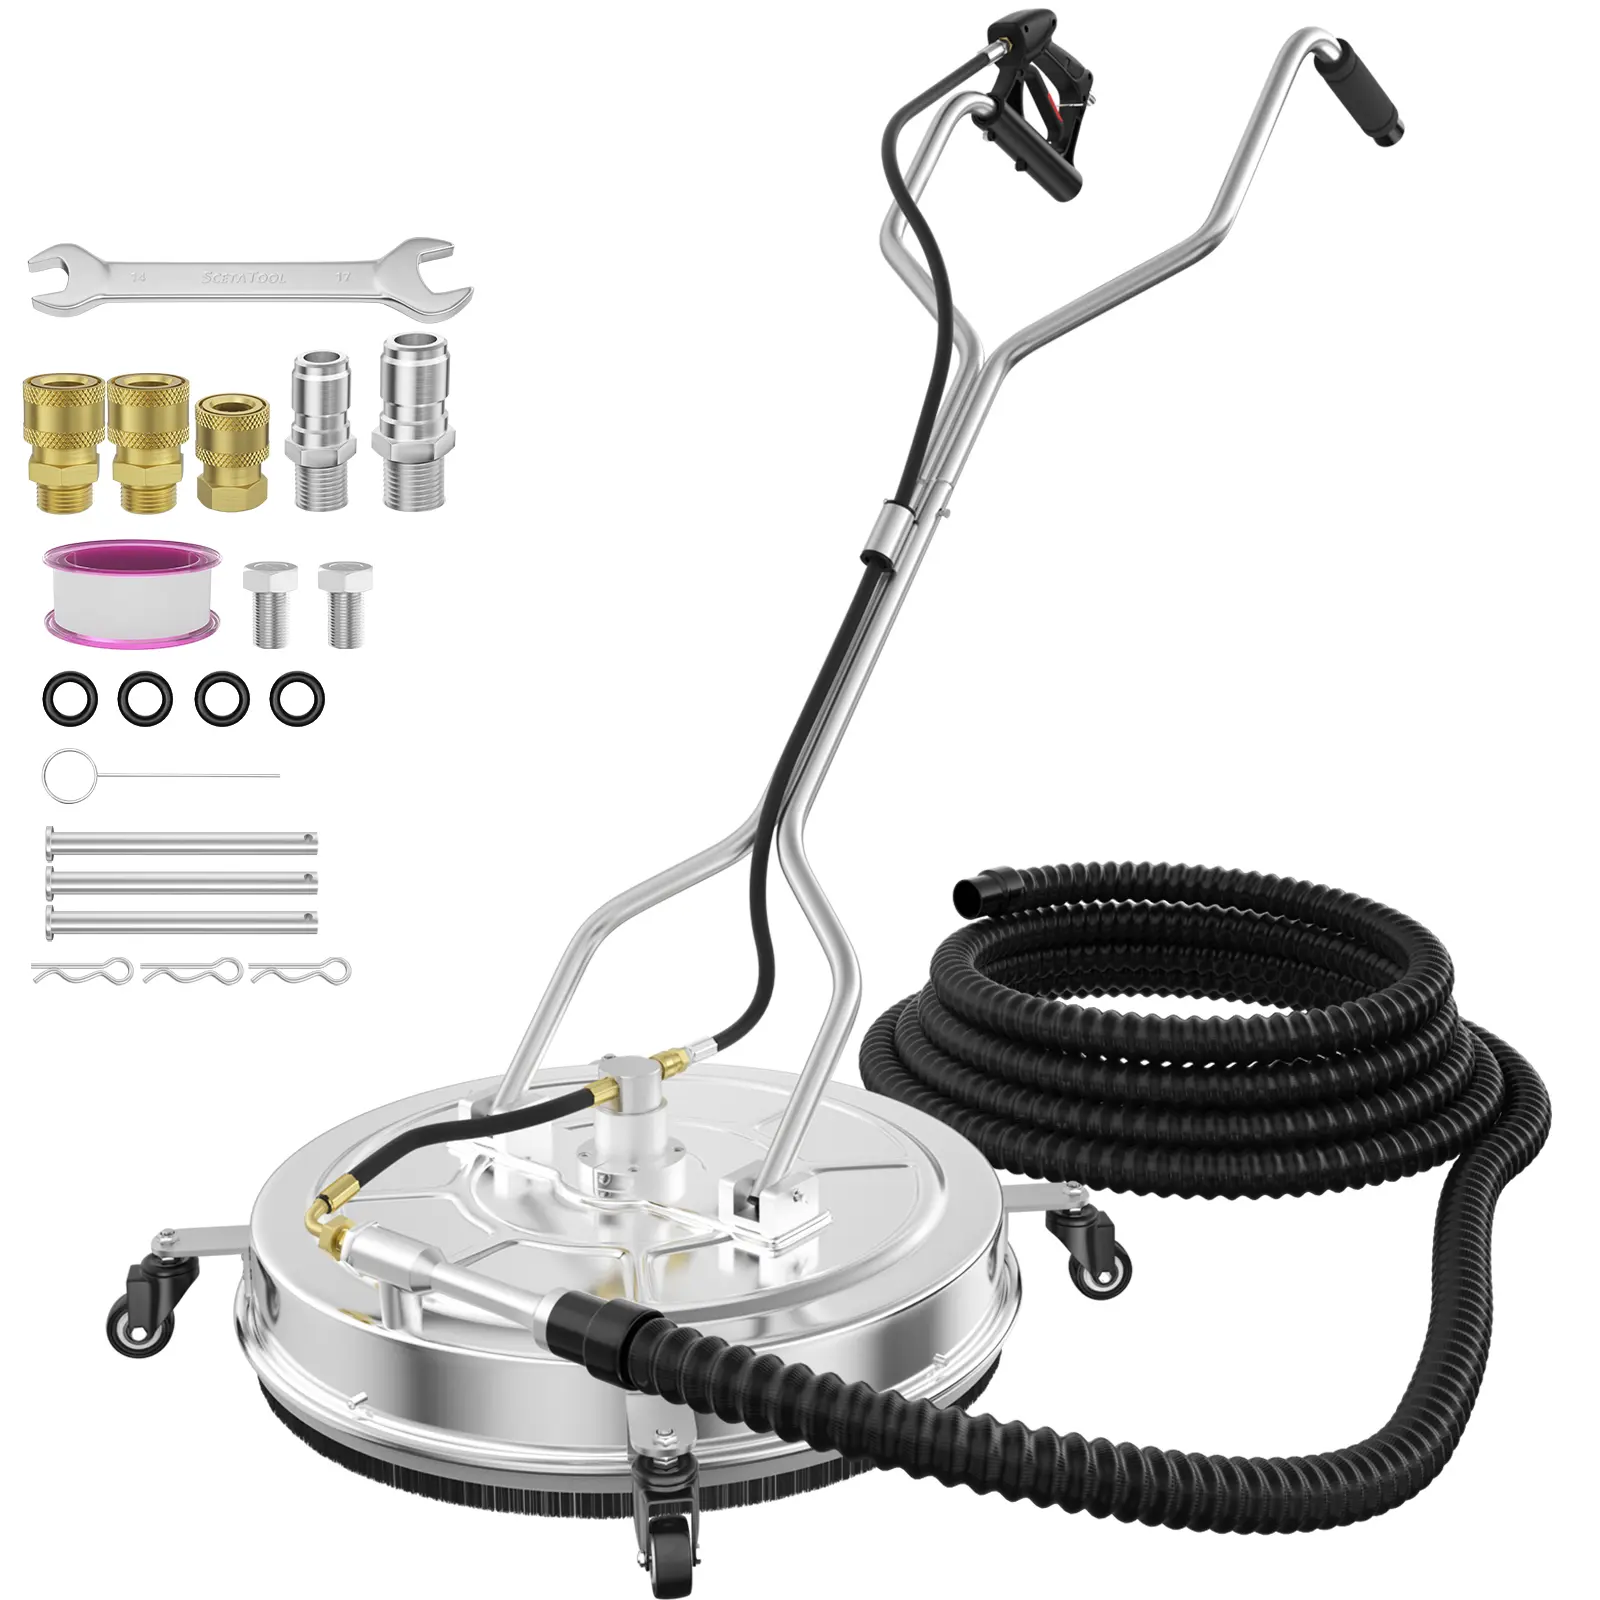 EVEAGE 24 inch Water Recovery Surface Cleaner Pressure Washer Dual Handle